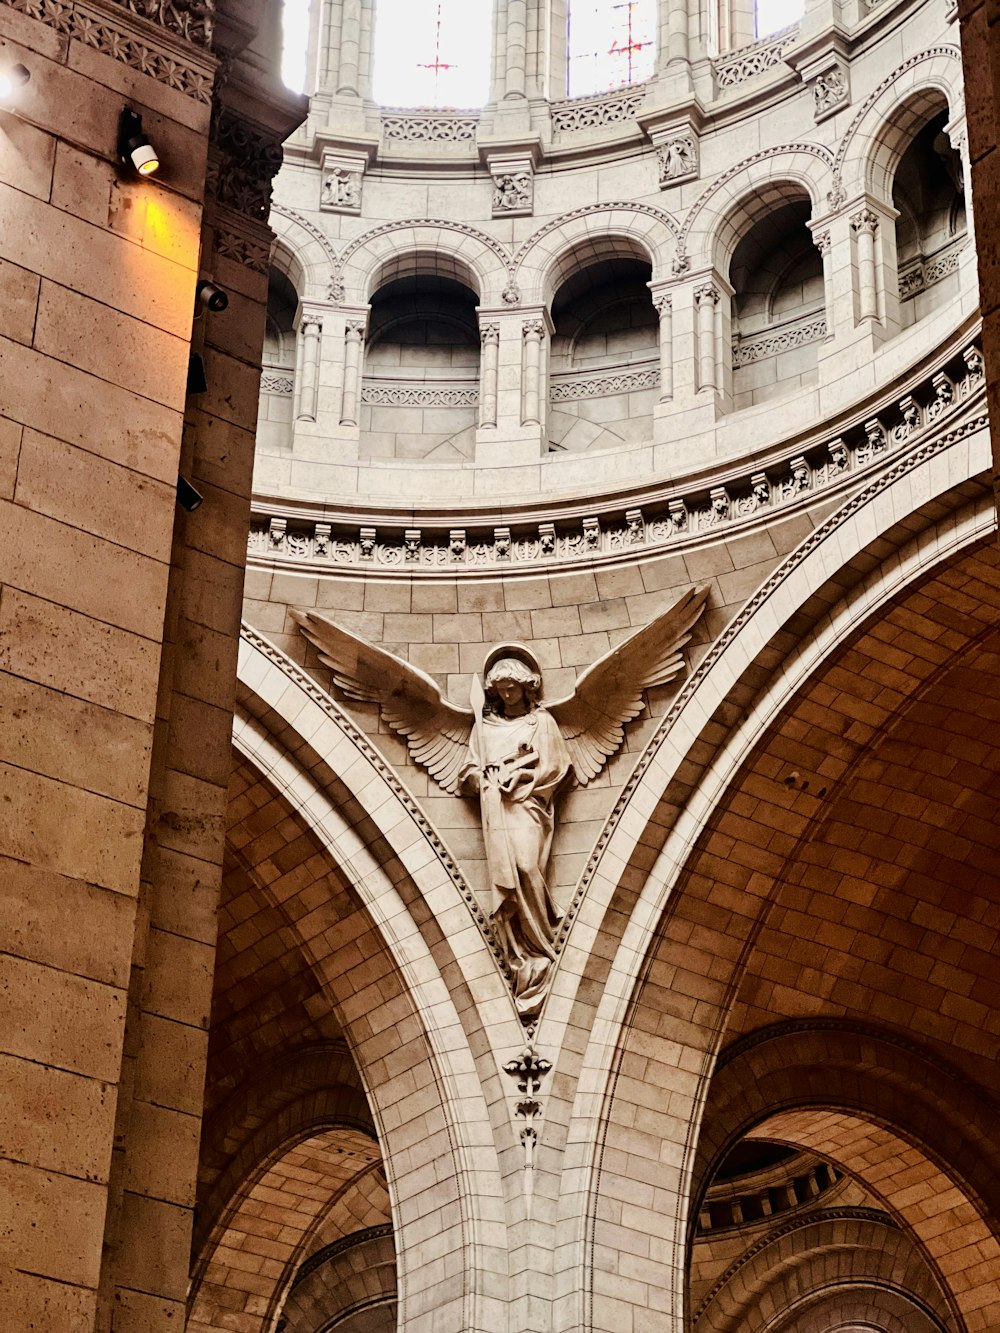 a statue of an angel on the side of a building